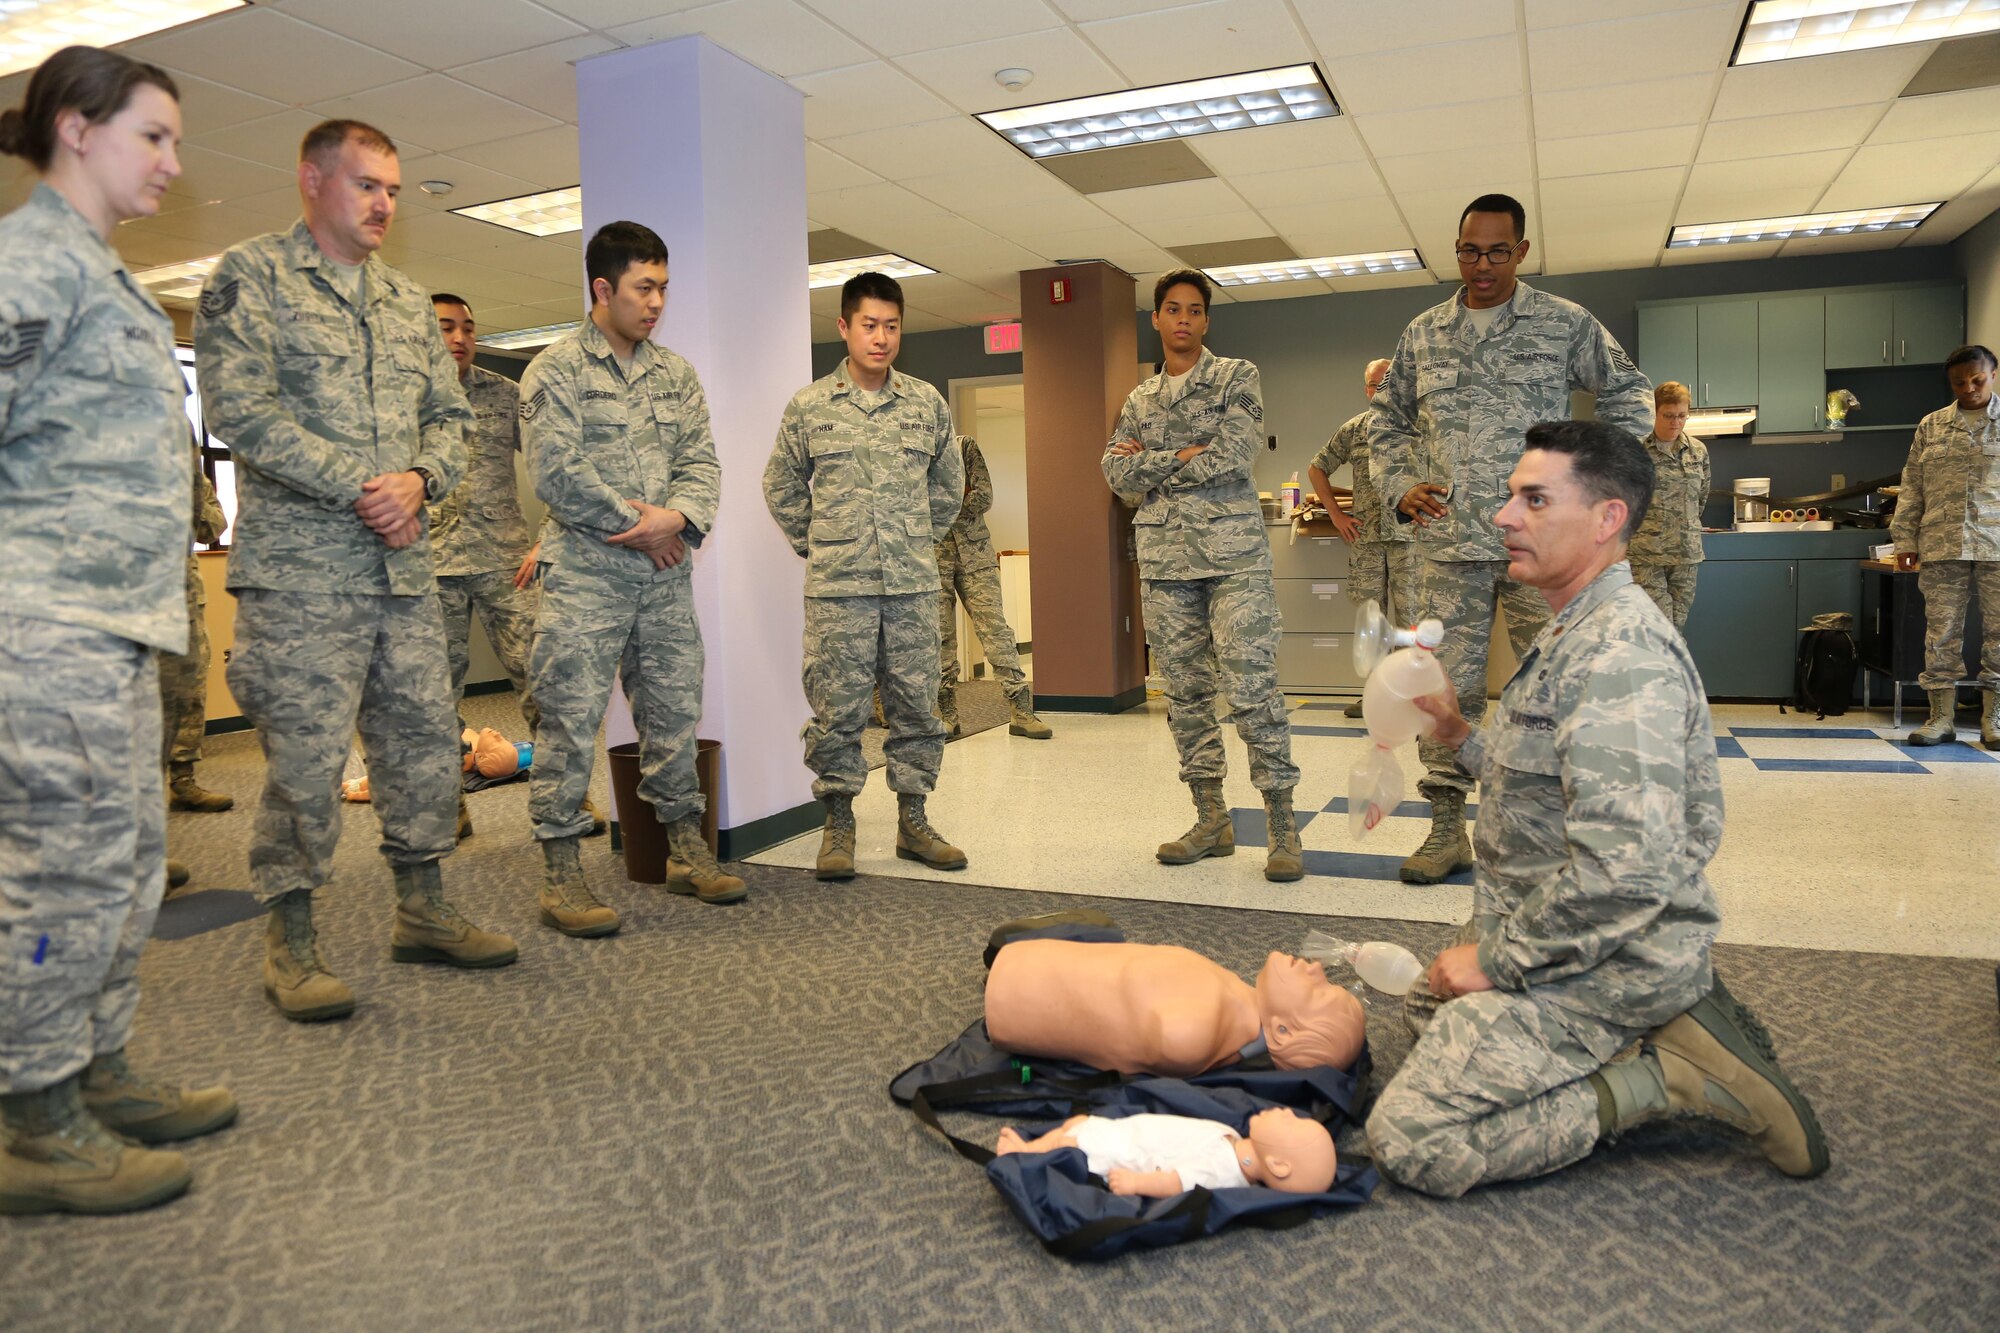 Citizen Airmen from the 349th Air Mobility Wing take part in emergency medical technician training in the 349th Medical Squadron’s new training room, April 17, 2016 at Travis Air Force Base, Calif.  The repurposed office space will improve the squadron’s ability to conduct a wide range of skill and qualification training.  (U.S. Air Force photo/Lt. Col. Robert Couse-Baker/ Released)
